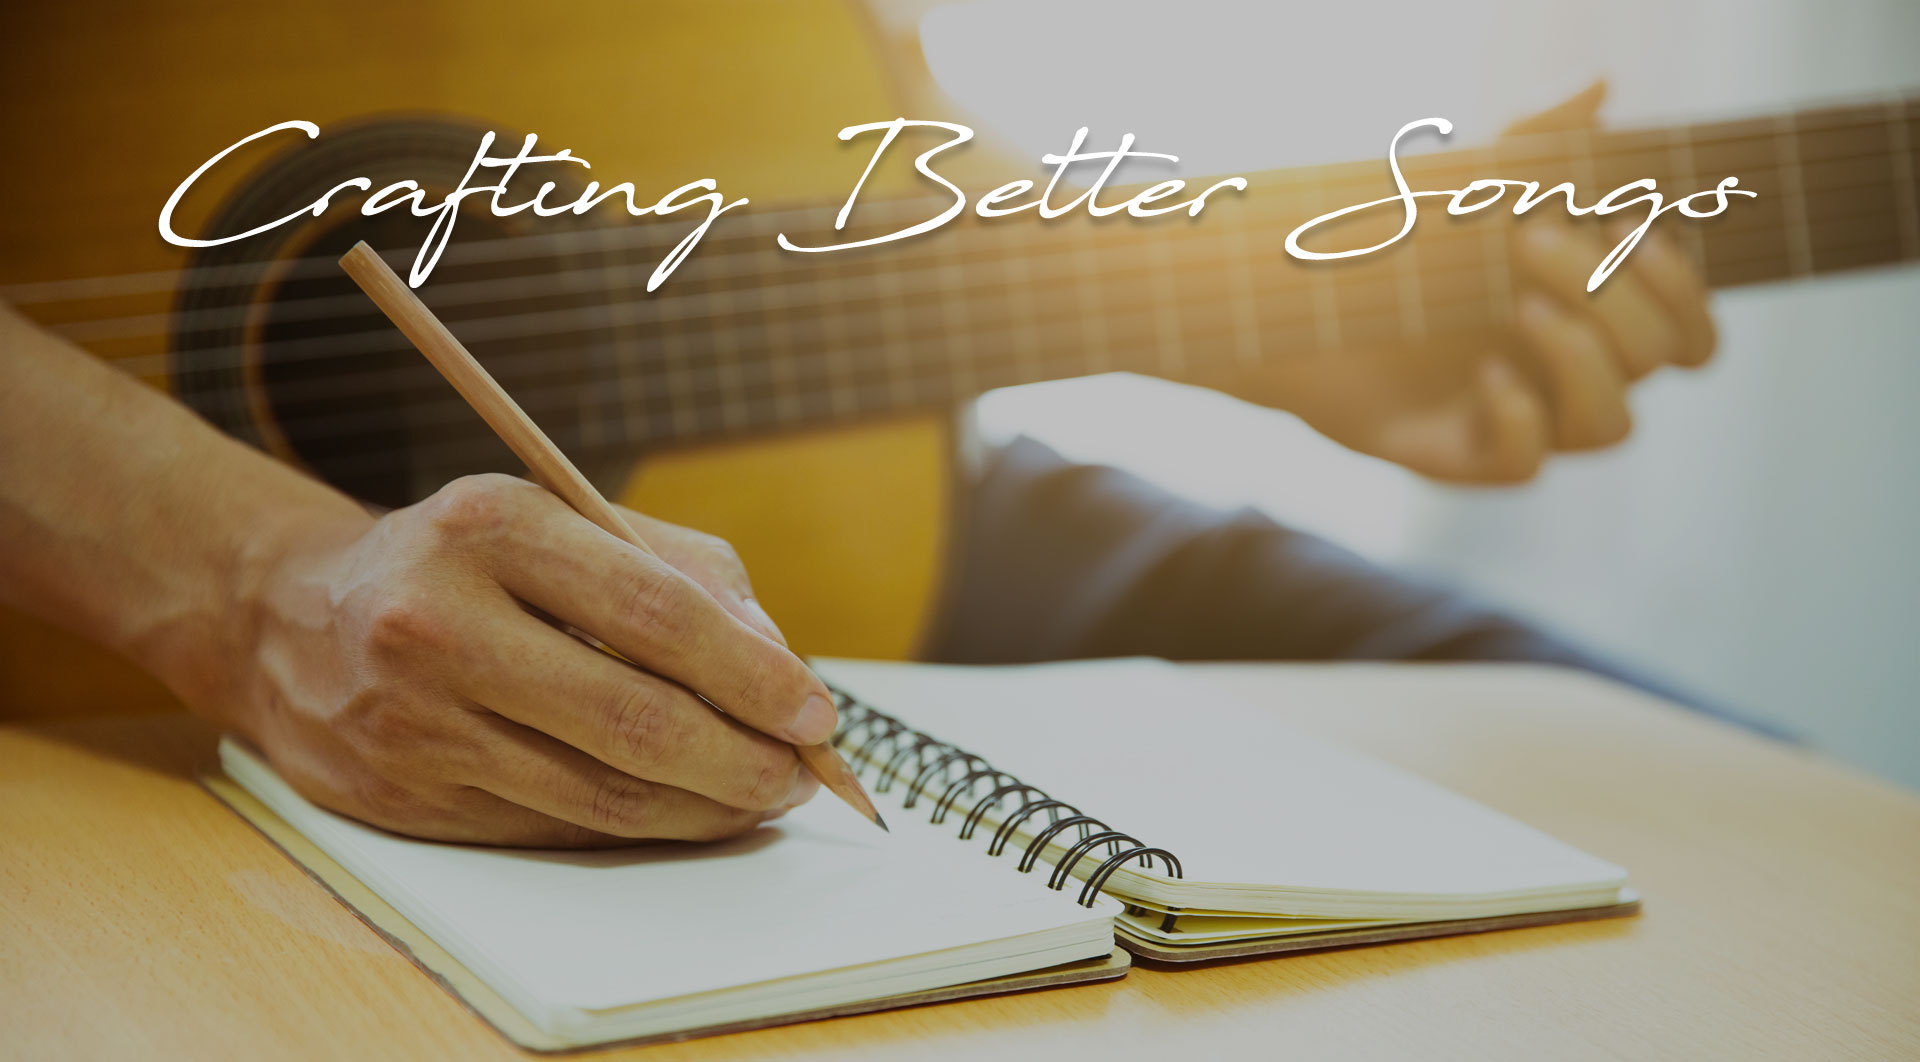 Crafting Better Songs songwriting workshops with Jim & Mariam